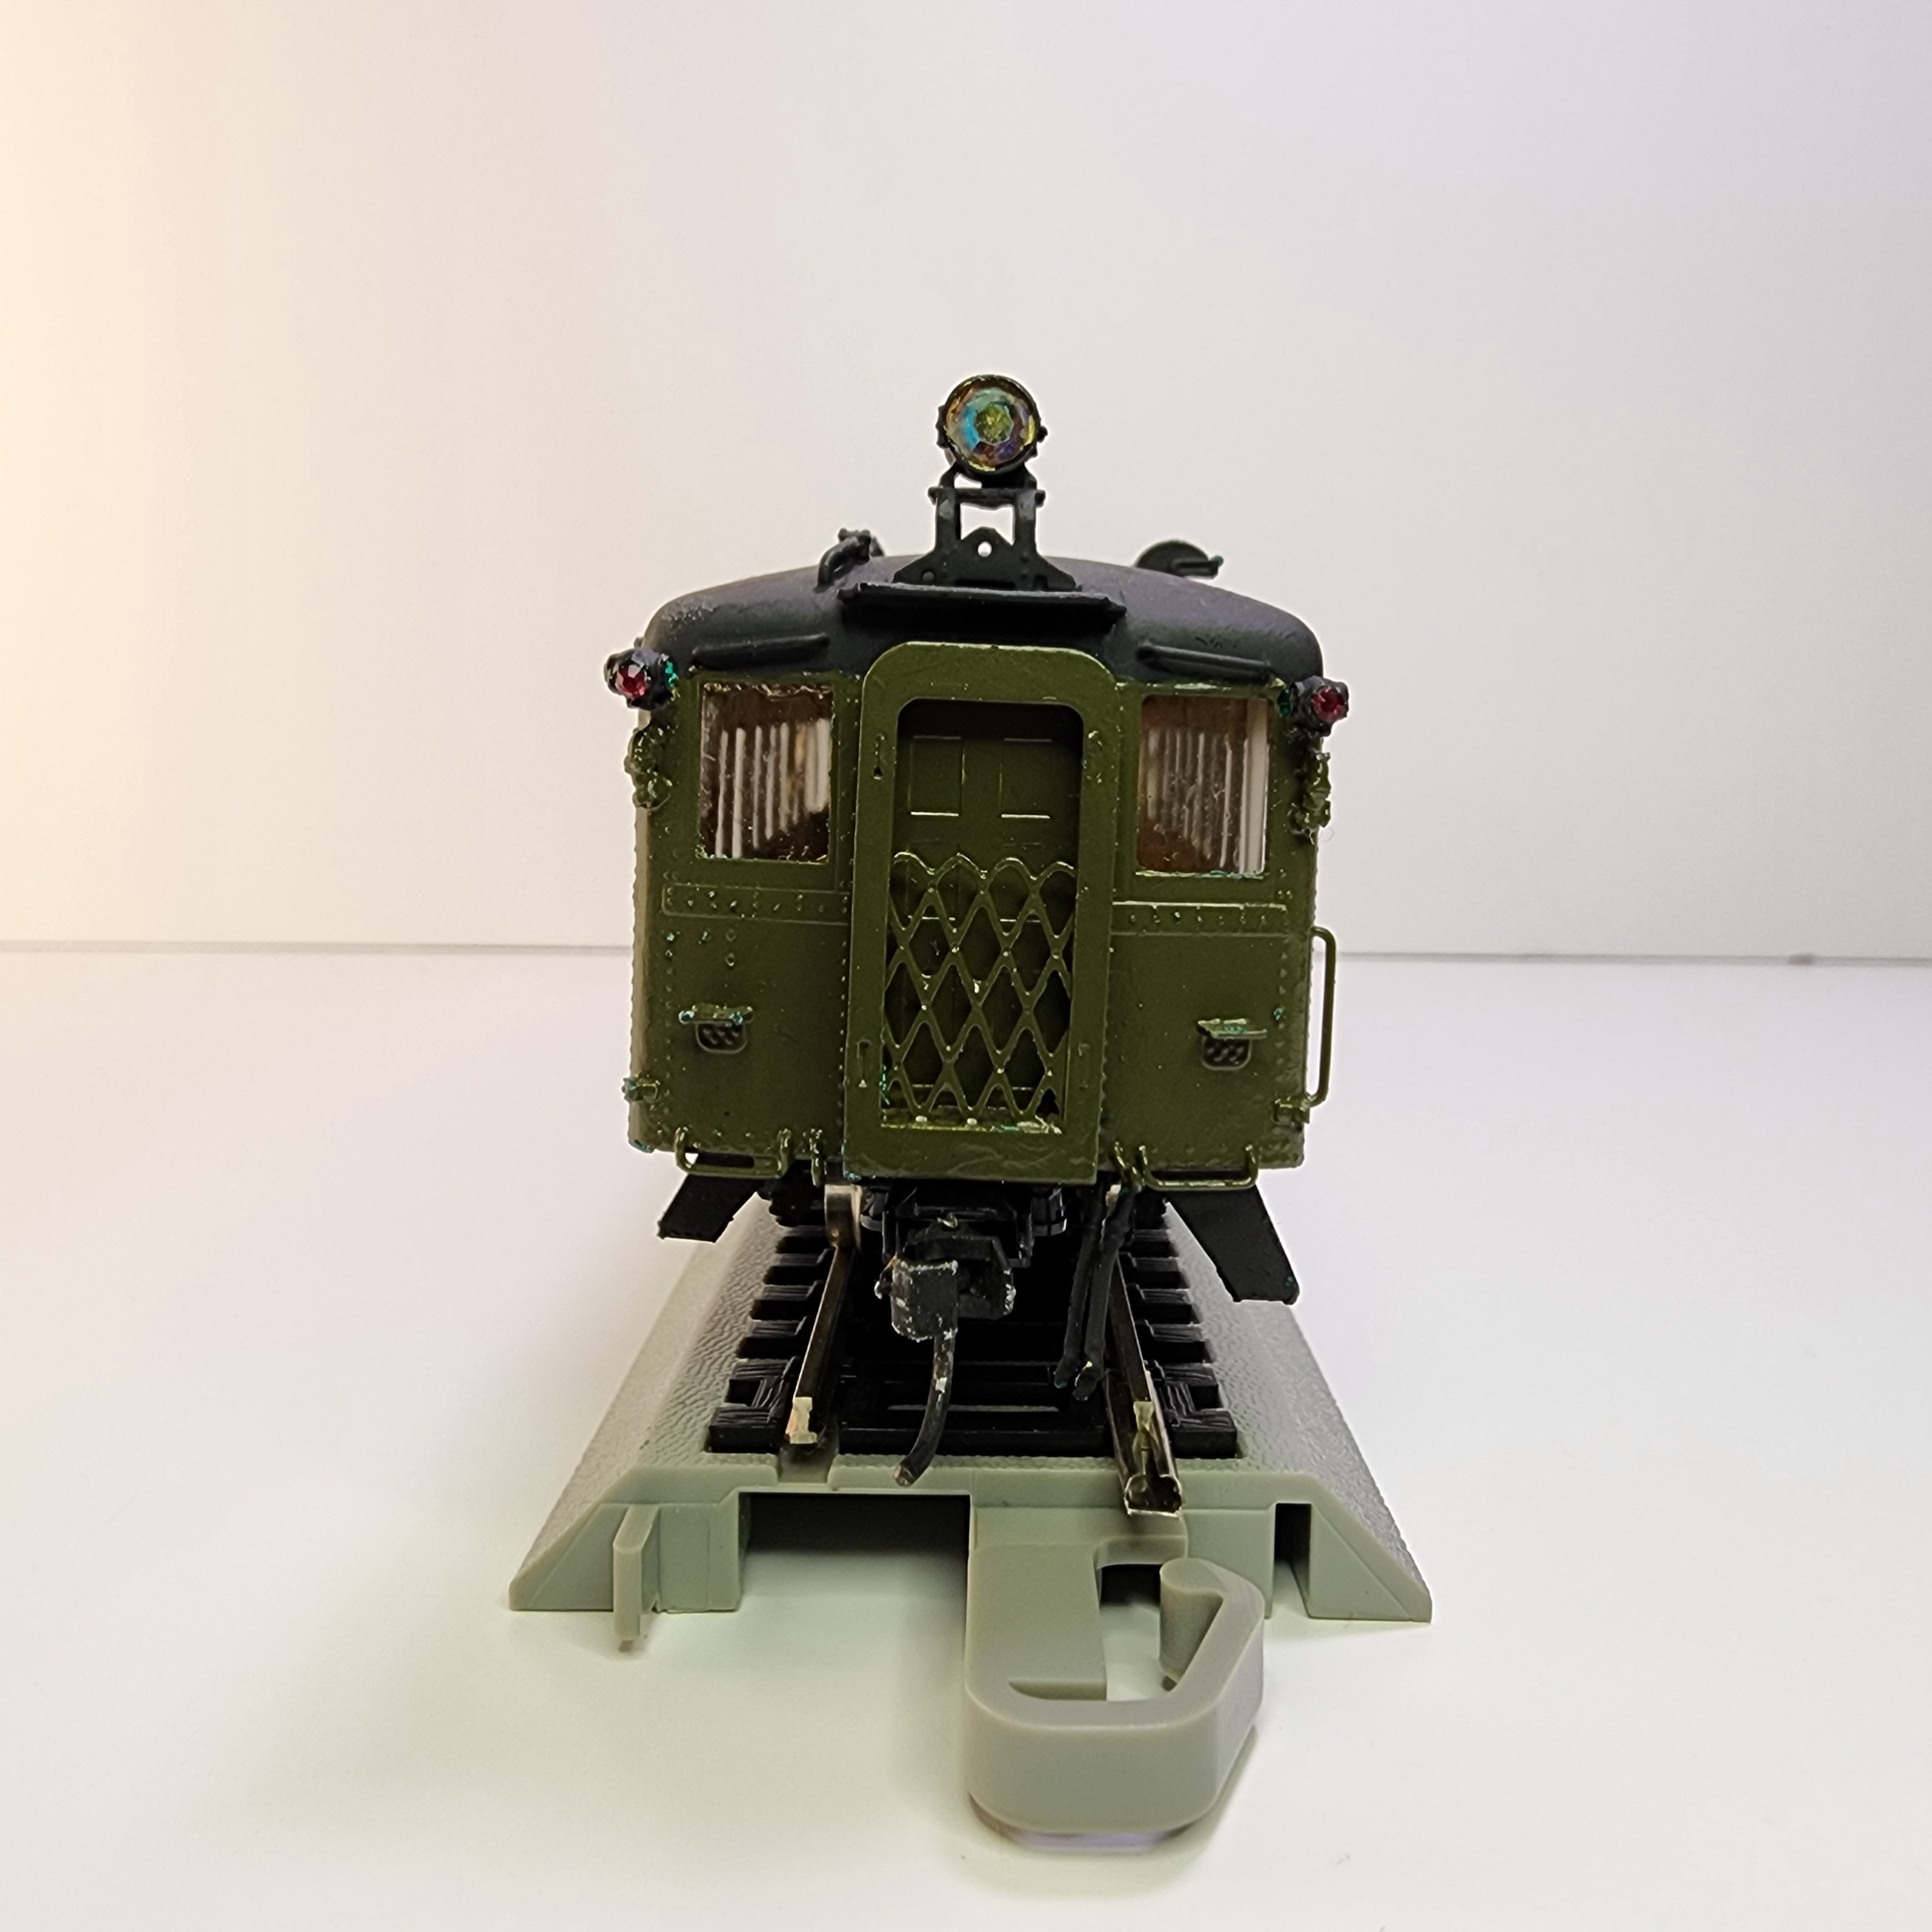 Duplicate “HO scale CNR E-60 Gas Electric Brass Locomotive  Painted (PREOWNED)